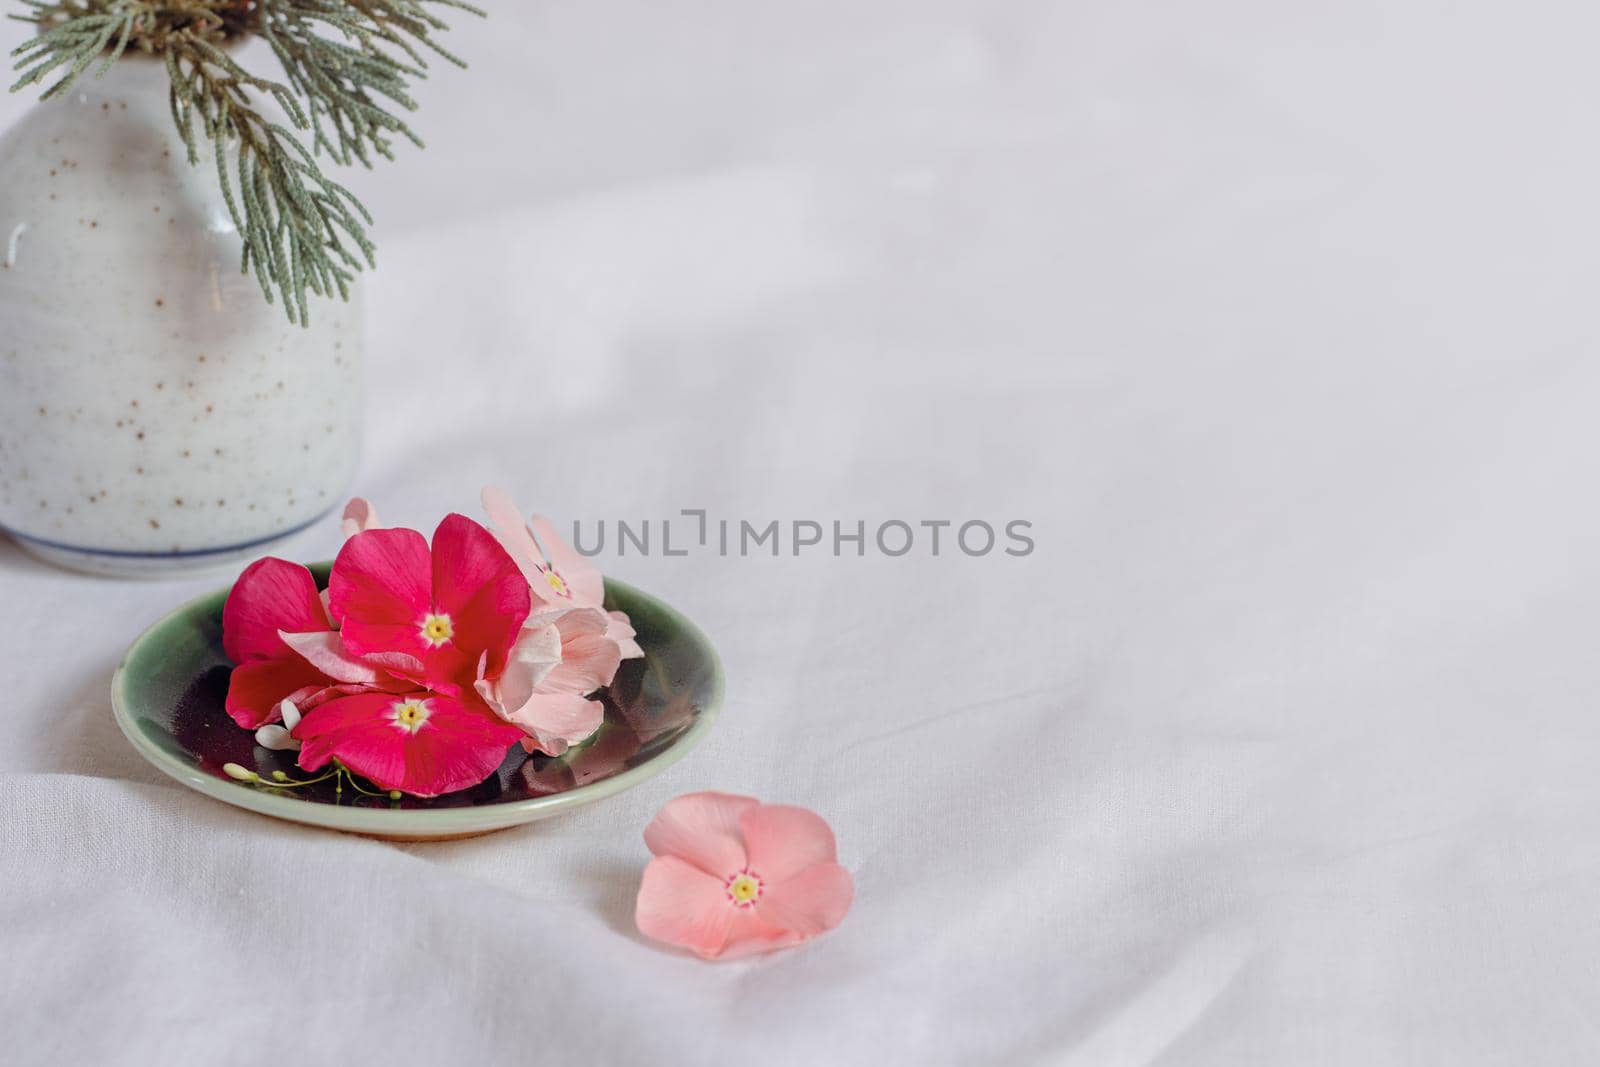 Composition of dainty periwinkle flowers in a bright white background showing fresh and tranquil Spring aesthetic